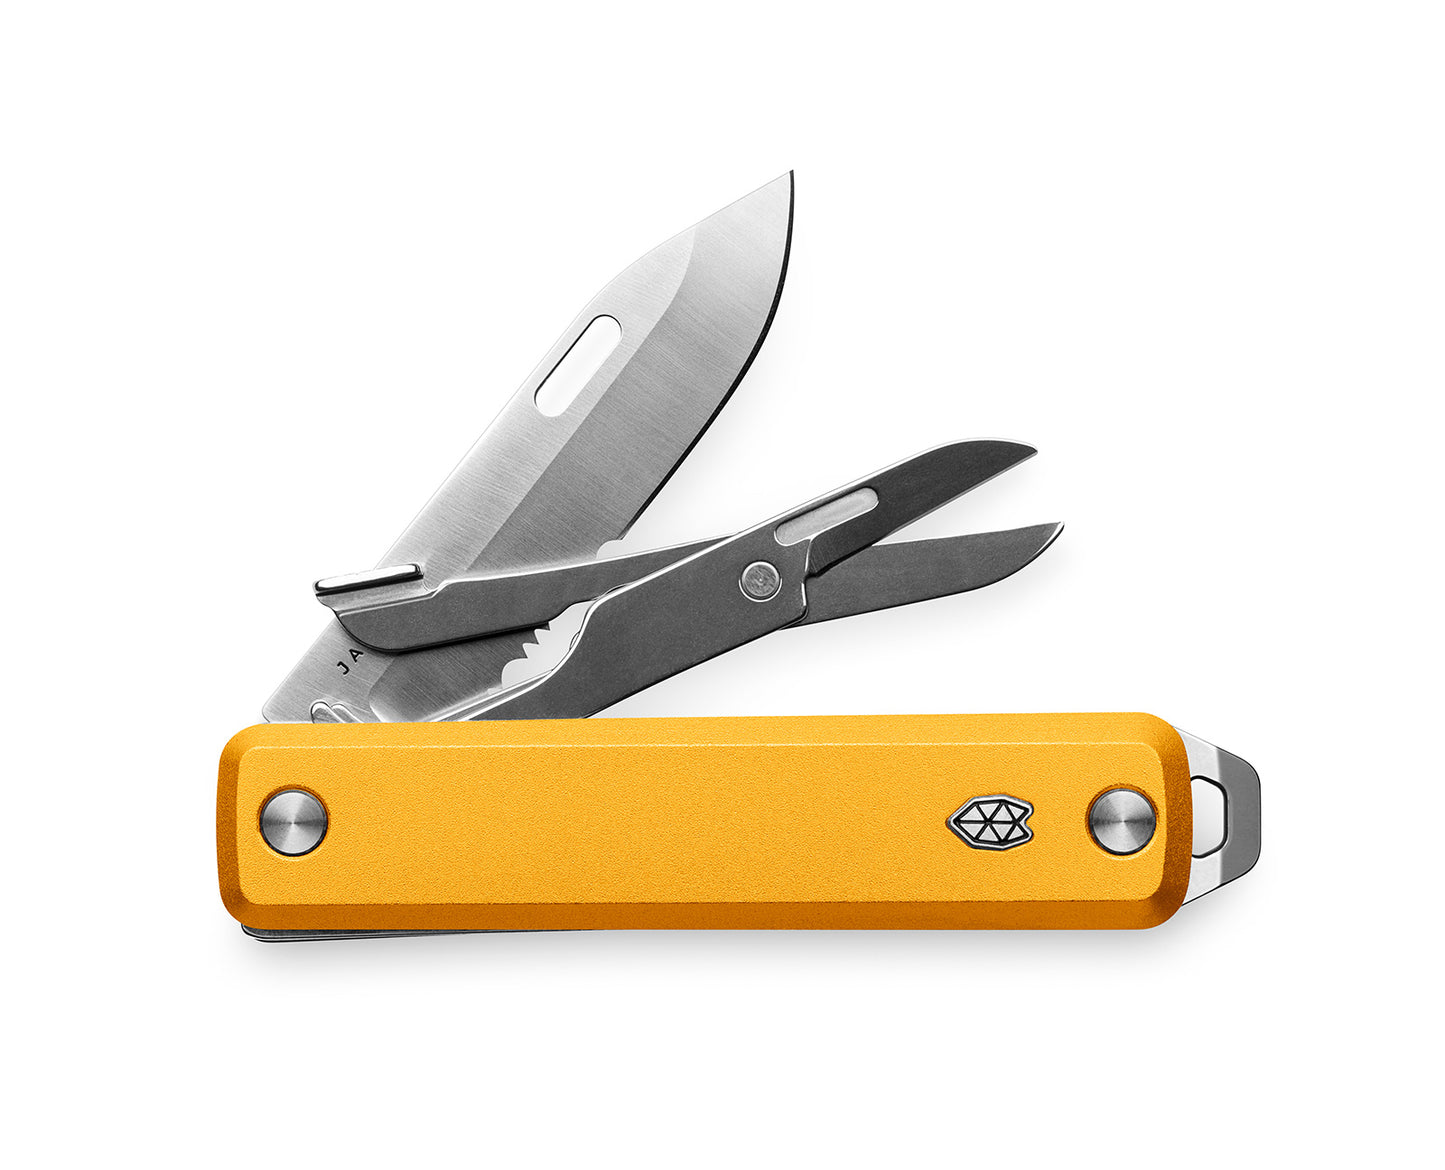 The Ellis multi-tool knife with canary handle.